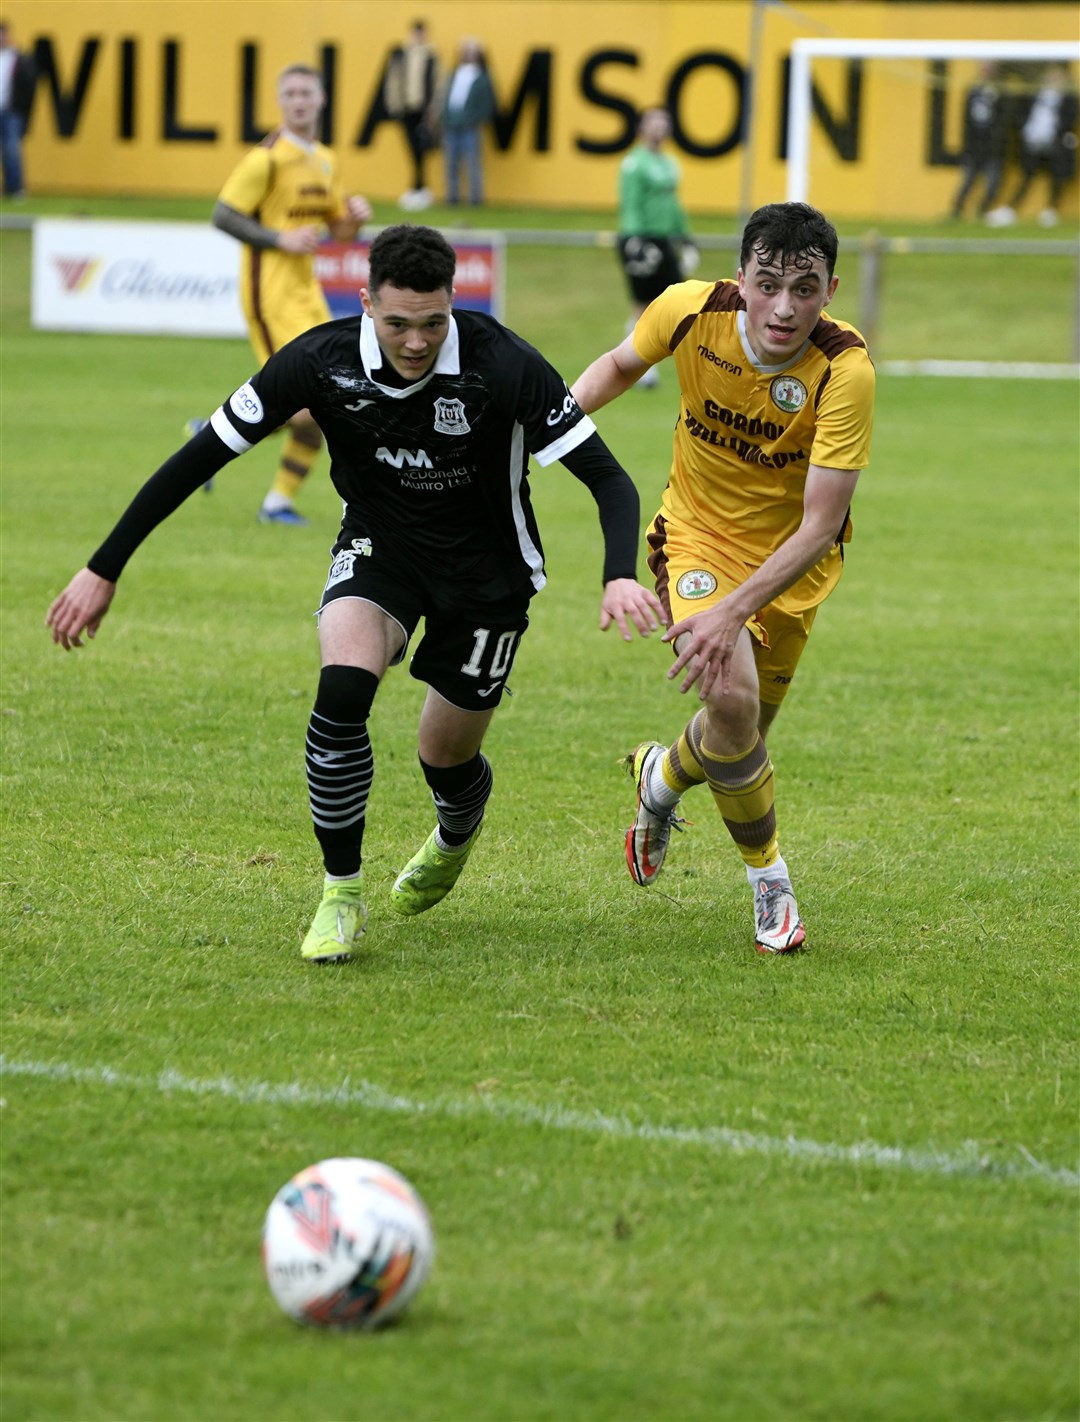 Elgin City's Dylan Lawrence races to get the ball ahead of Forres Mechanics' Kane Davies. Picture: Beth Taylor.